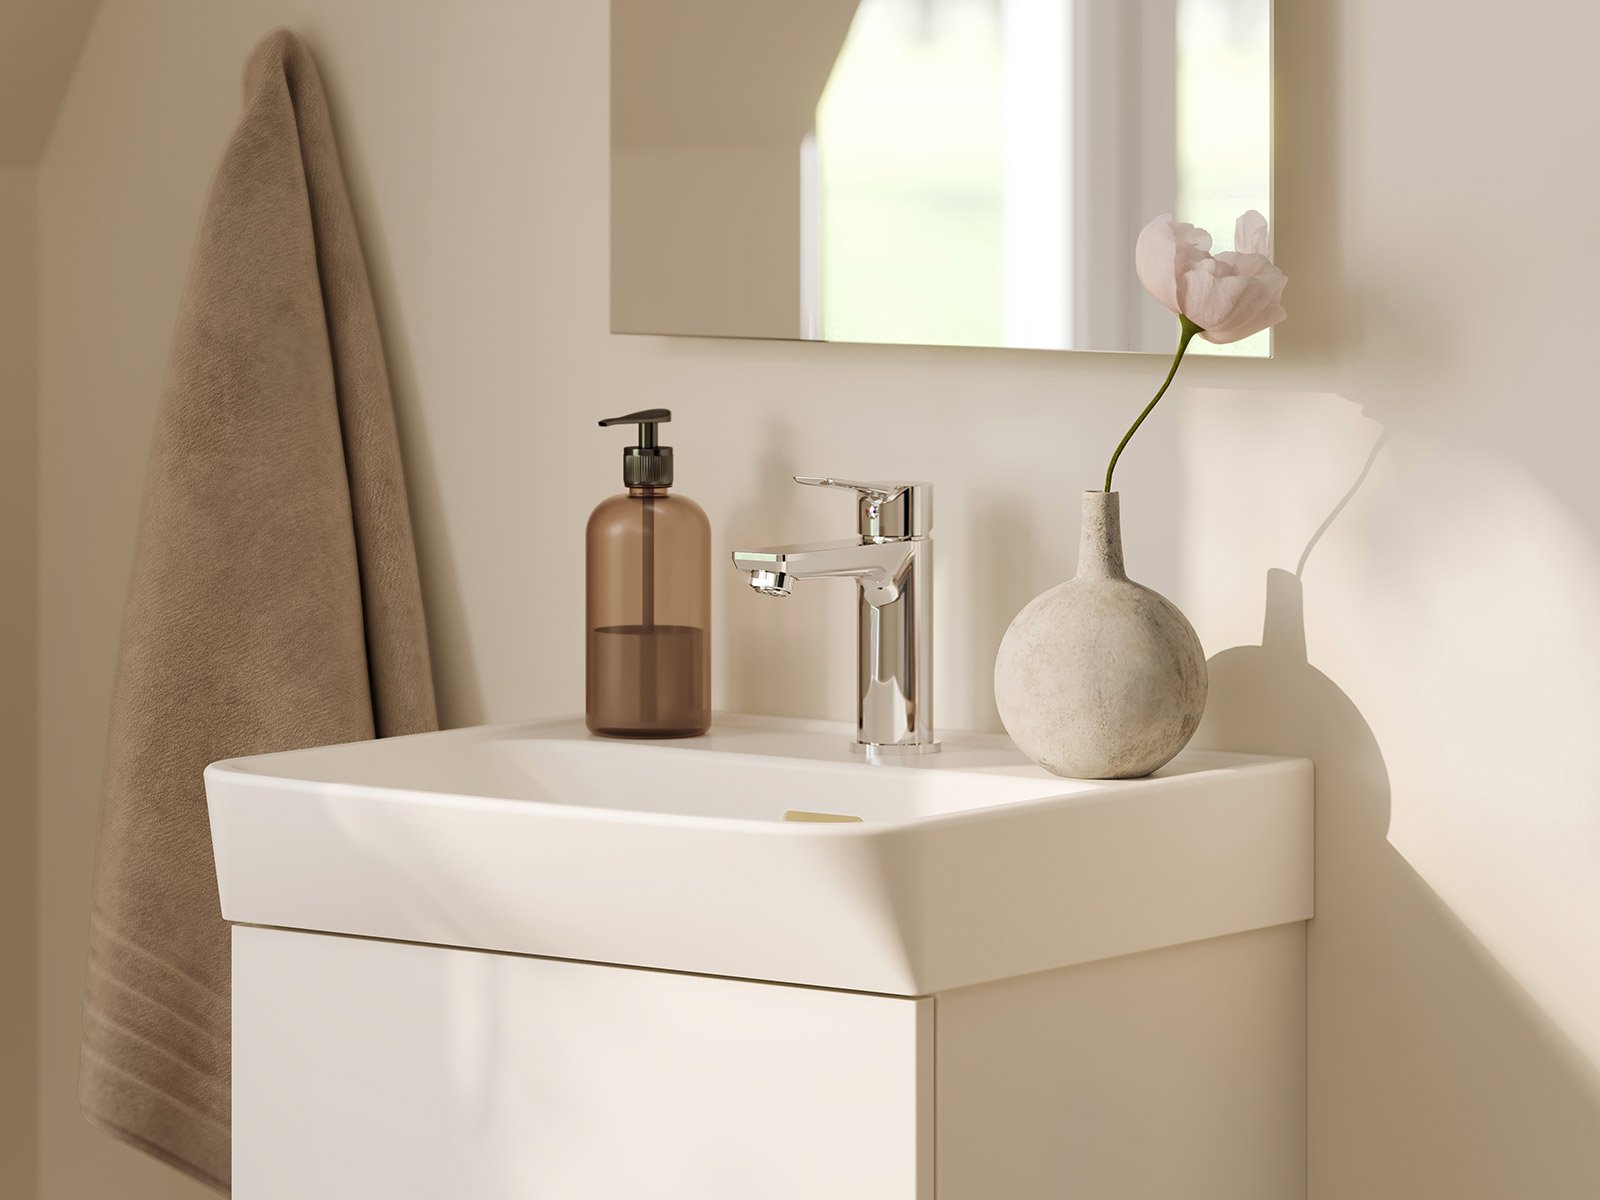 Tarju – a small, contemporary washbasin mixer perfectly suited for smaller washbasins.